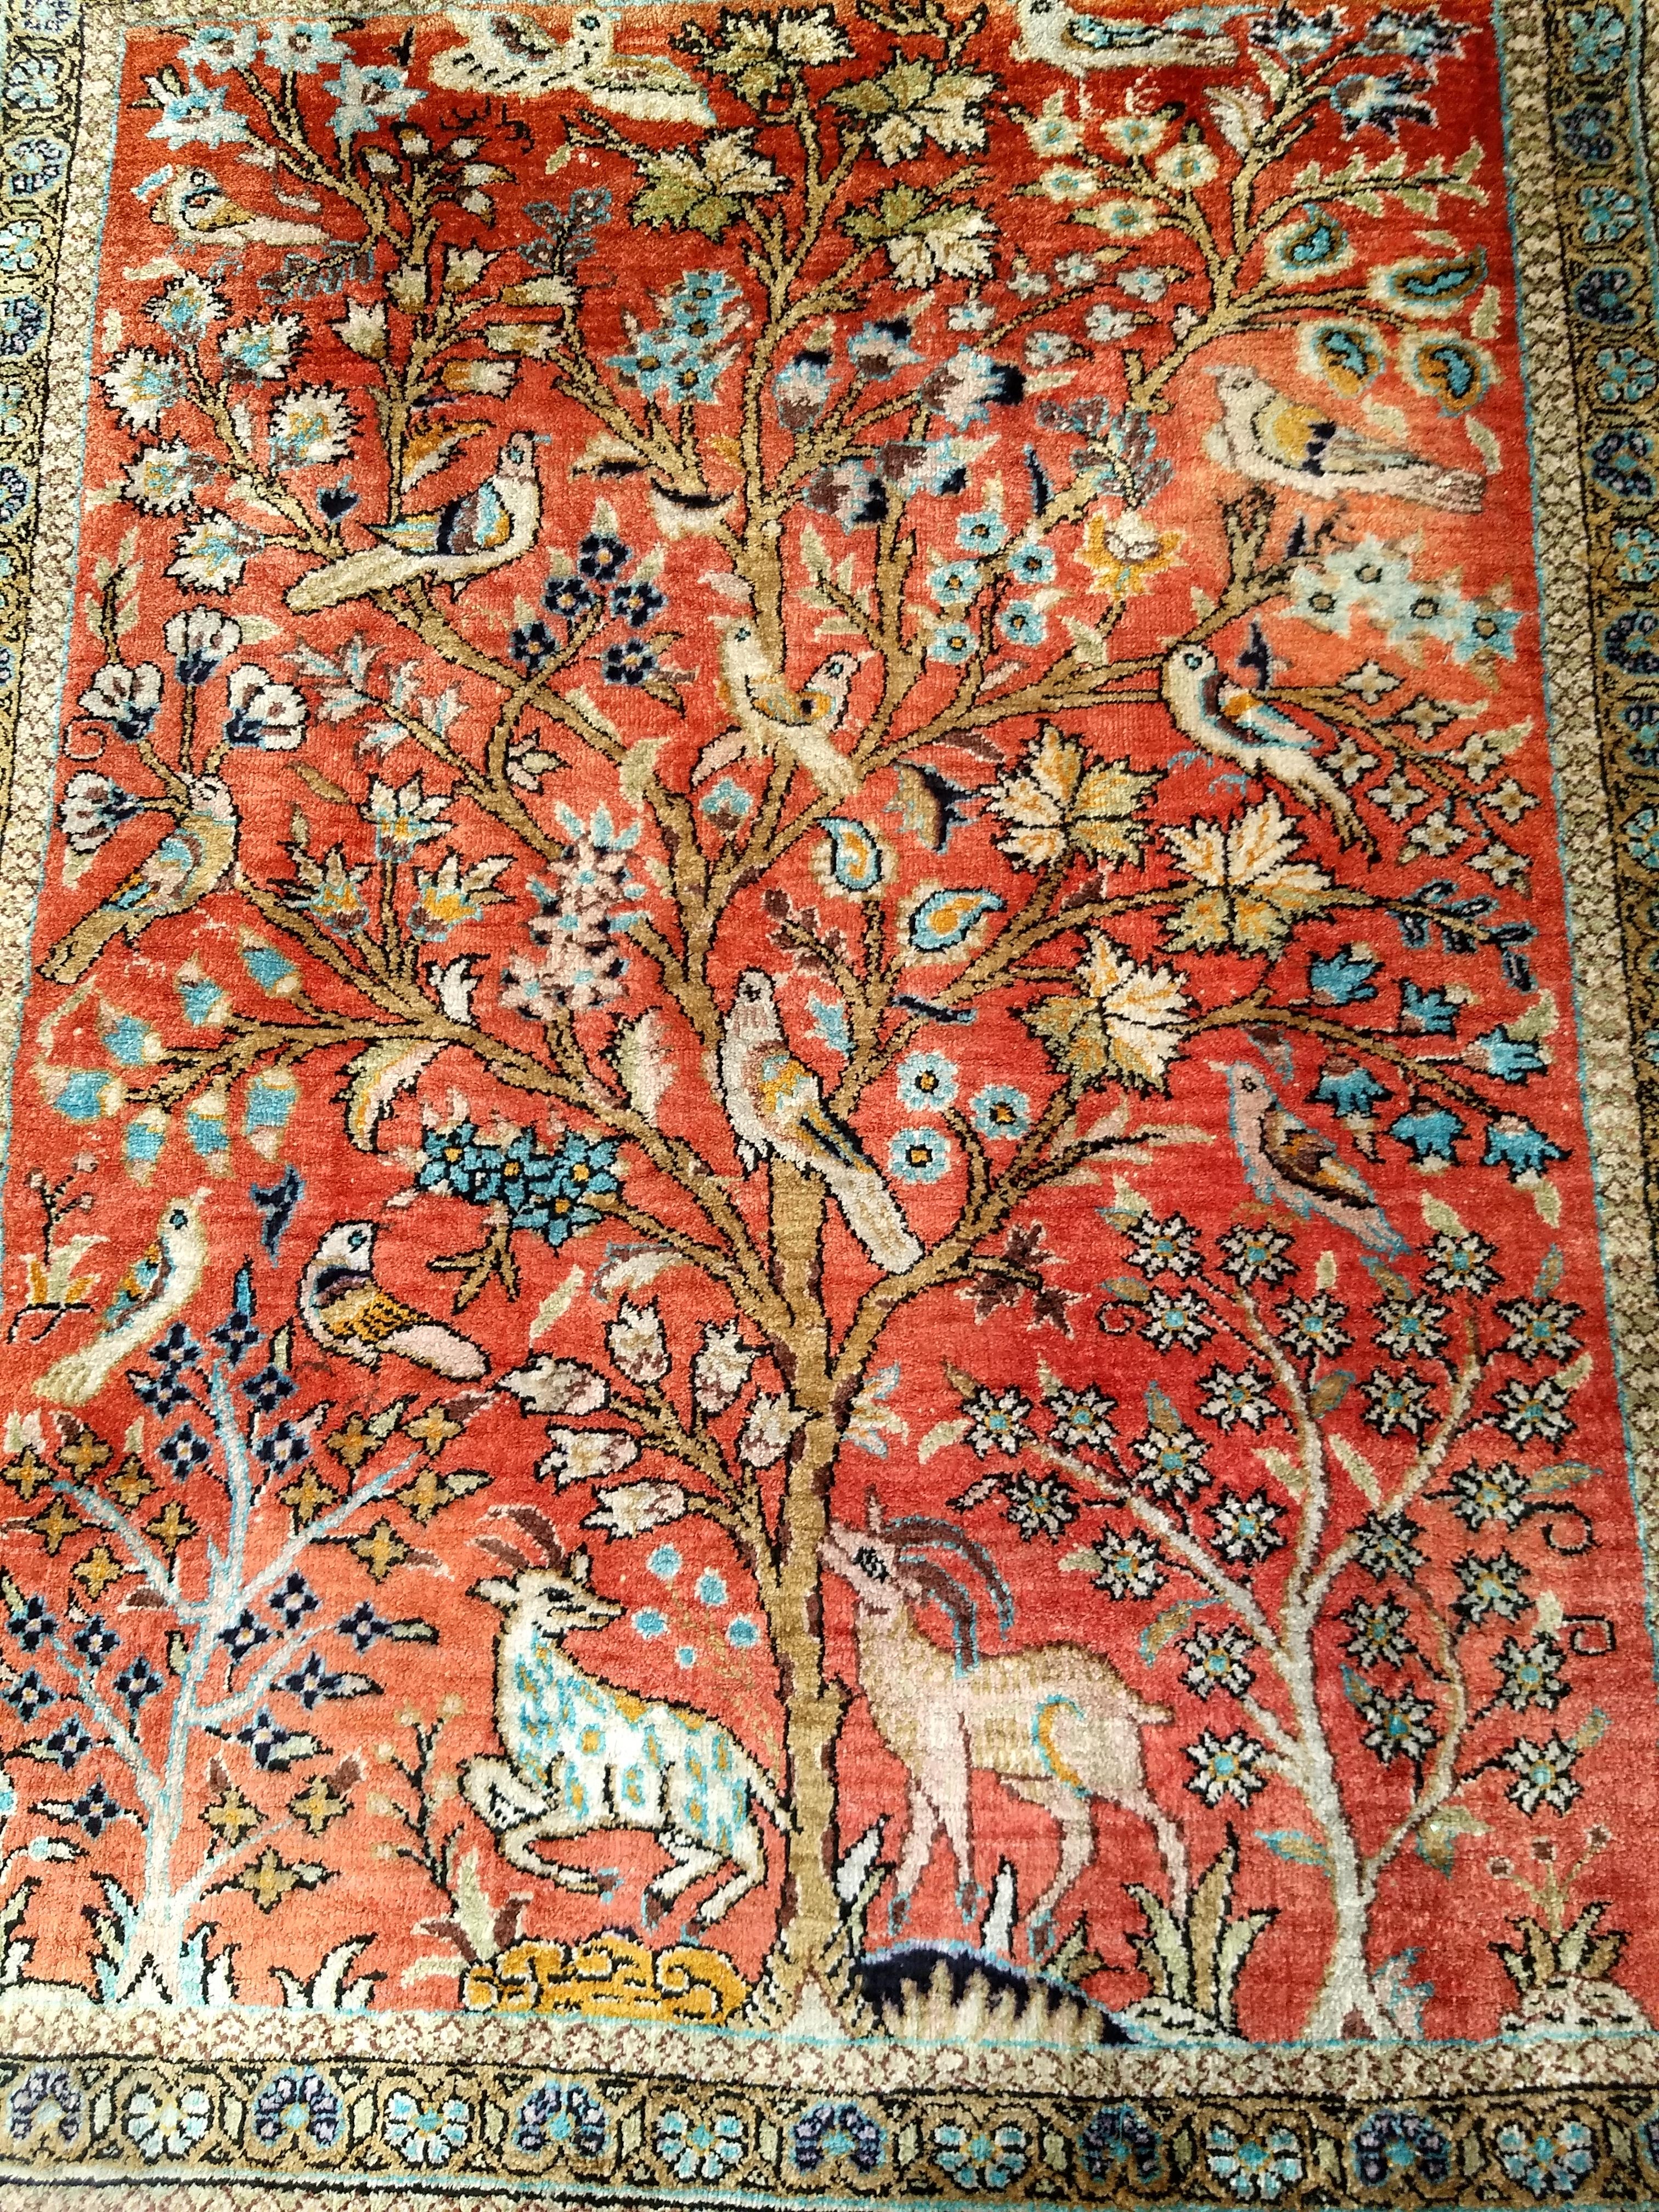 Hand-Woven Vintage Turkish Silk Hereke Tree of Life Pictorial Rug in Rust Red, Blue, Green For Sale